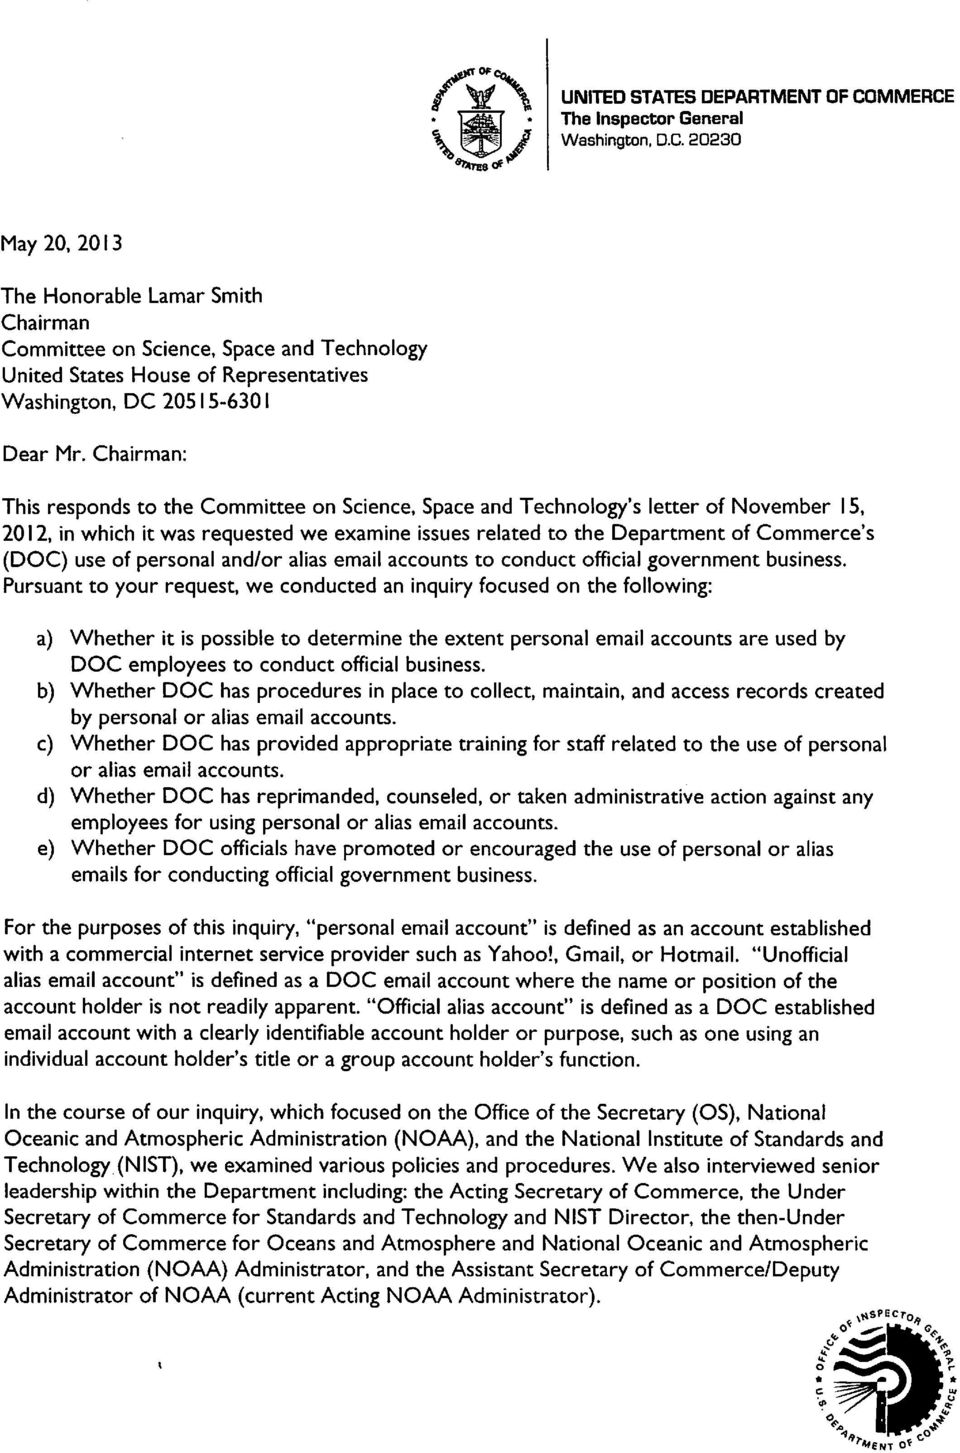 Chairman: This responds to the Committee on Science, Space and Technology's letter of November 15, 2012, in which it was requested we examine issues related to the Department of Commerce's (DOC) use